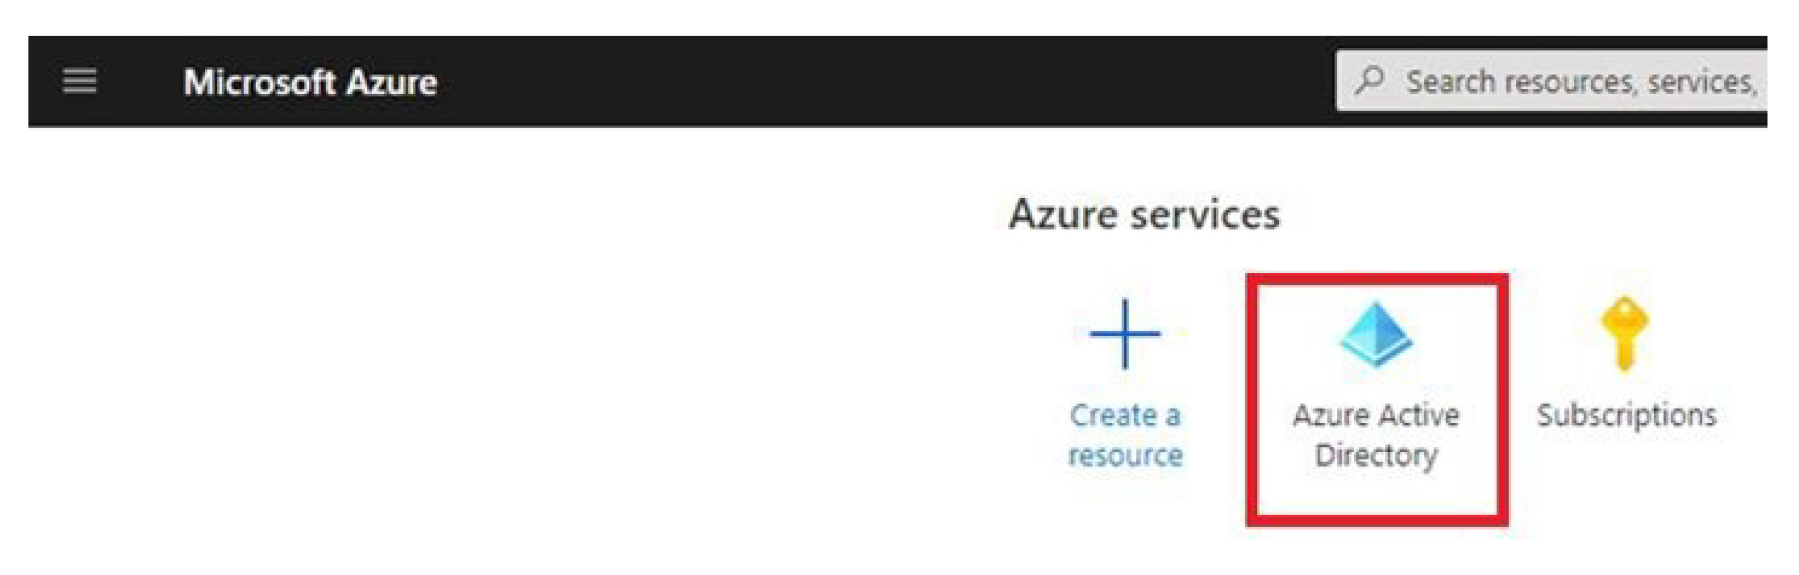 A screenshot showing the navigation to Azure Active Directory.